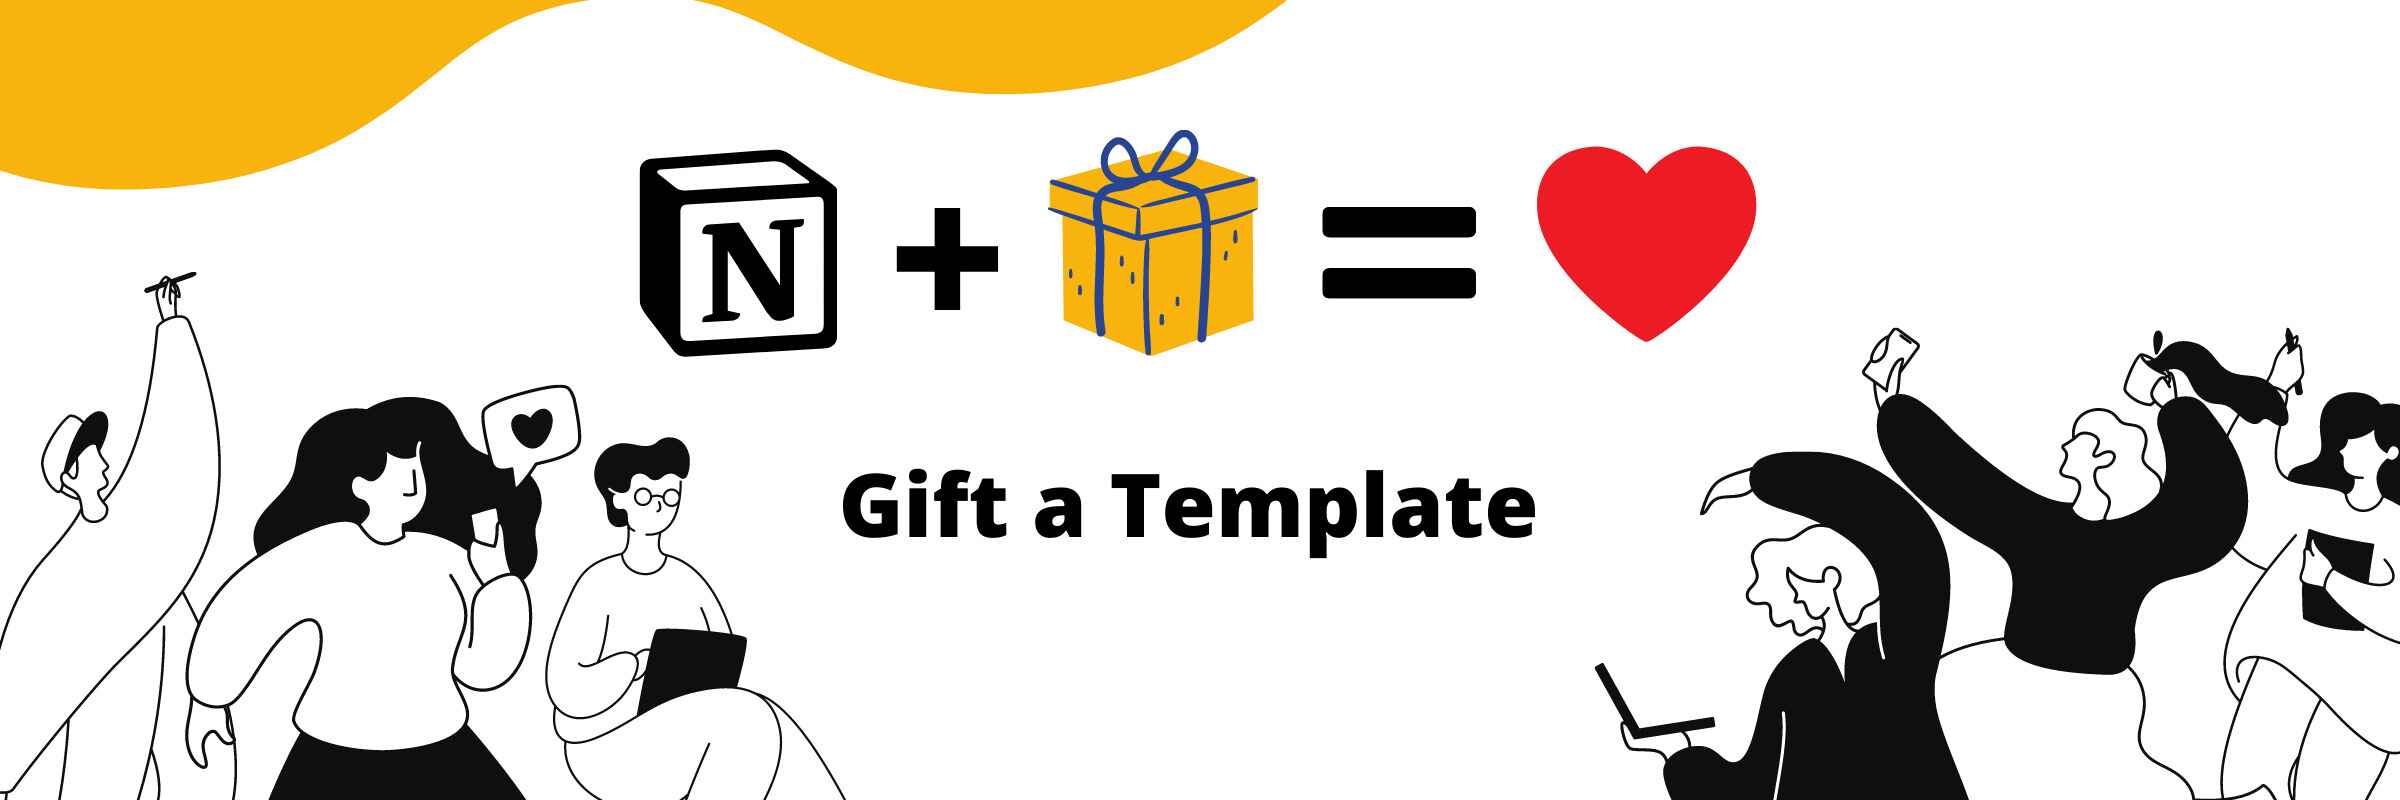 Gift a Notion Template to anyone